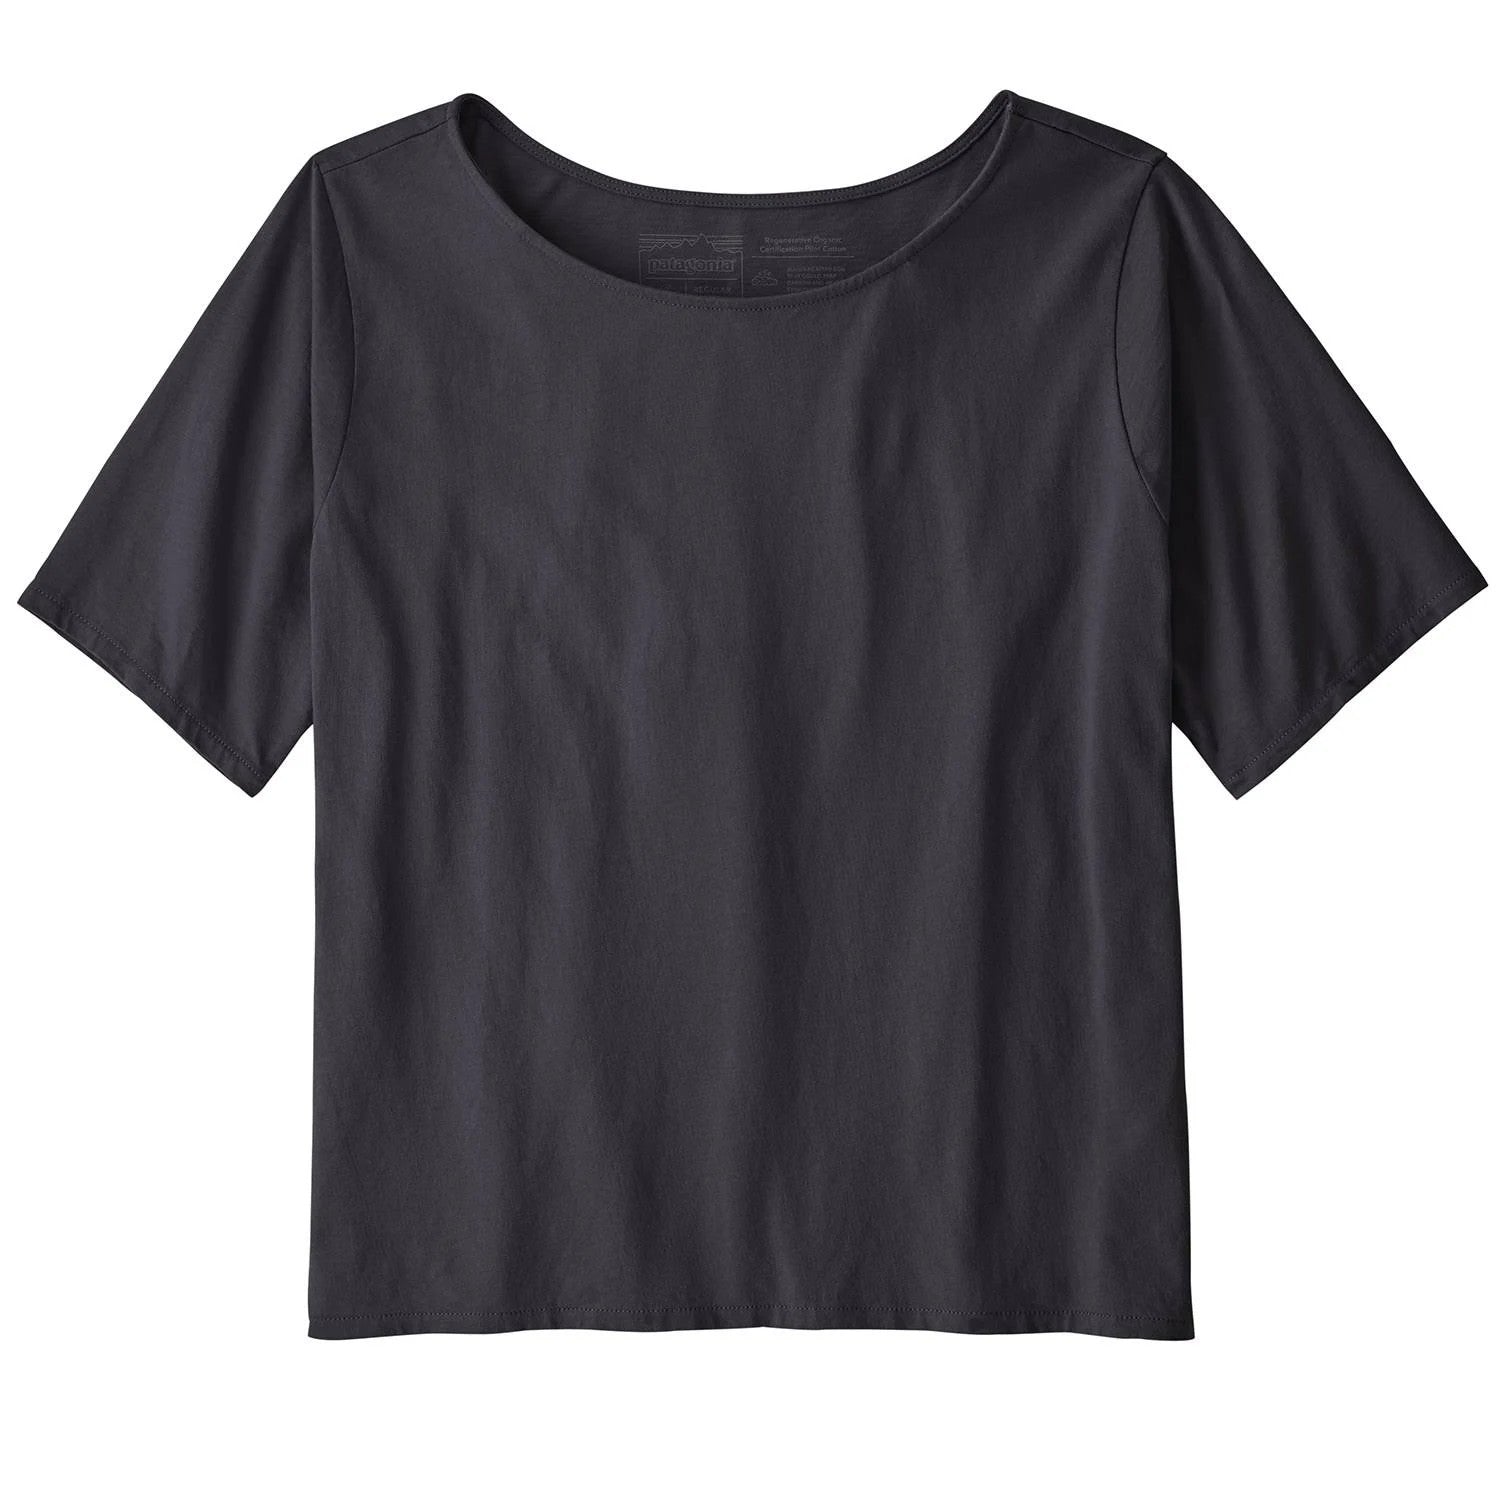 Patagonia Women's Cotton in Conversion Tee